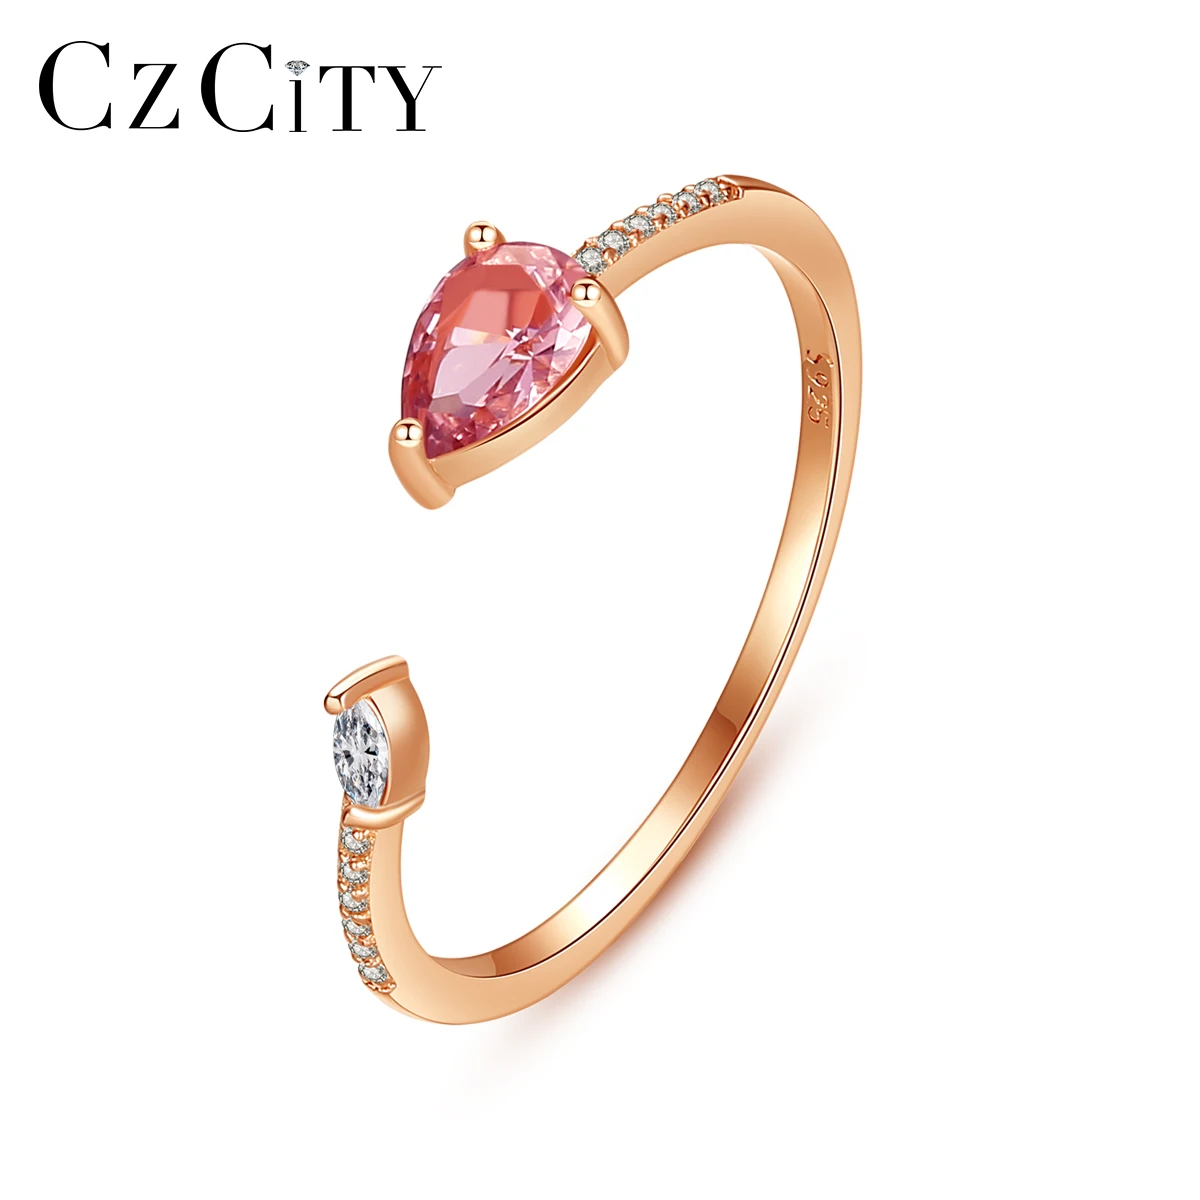 

CZCITY 925 Sterling Silver Open Ring Personalized Pave Gemstone Rings for Ladies 2020 Wholesale